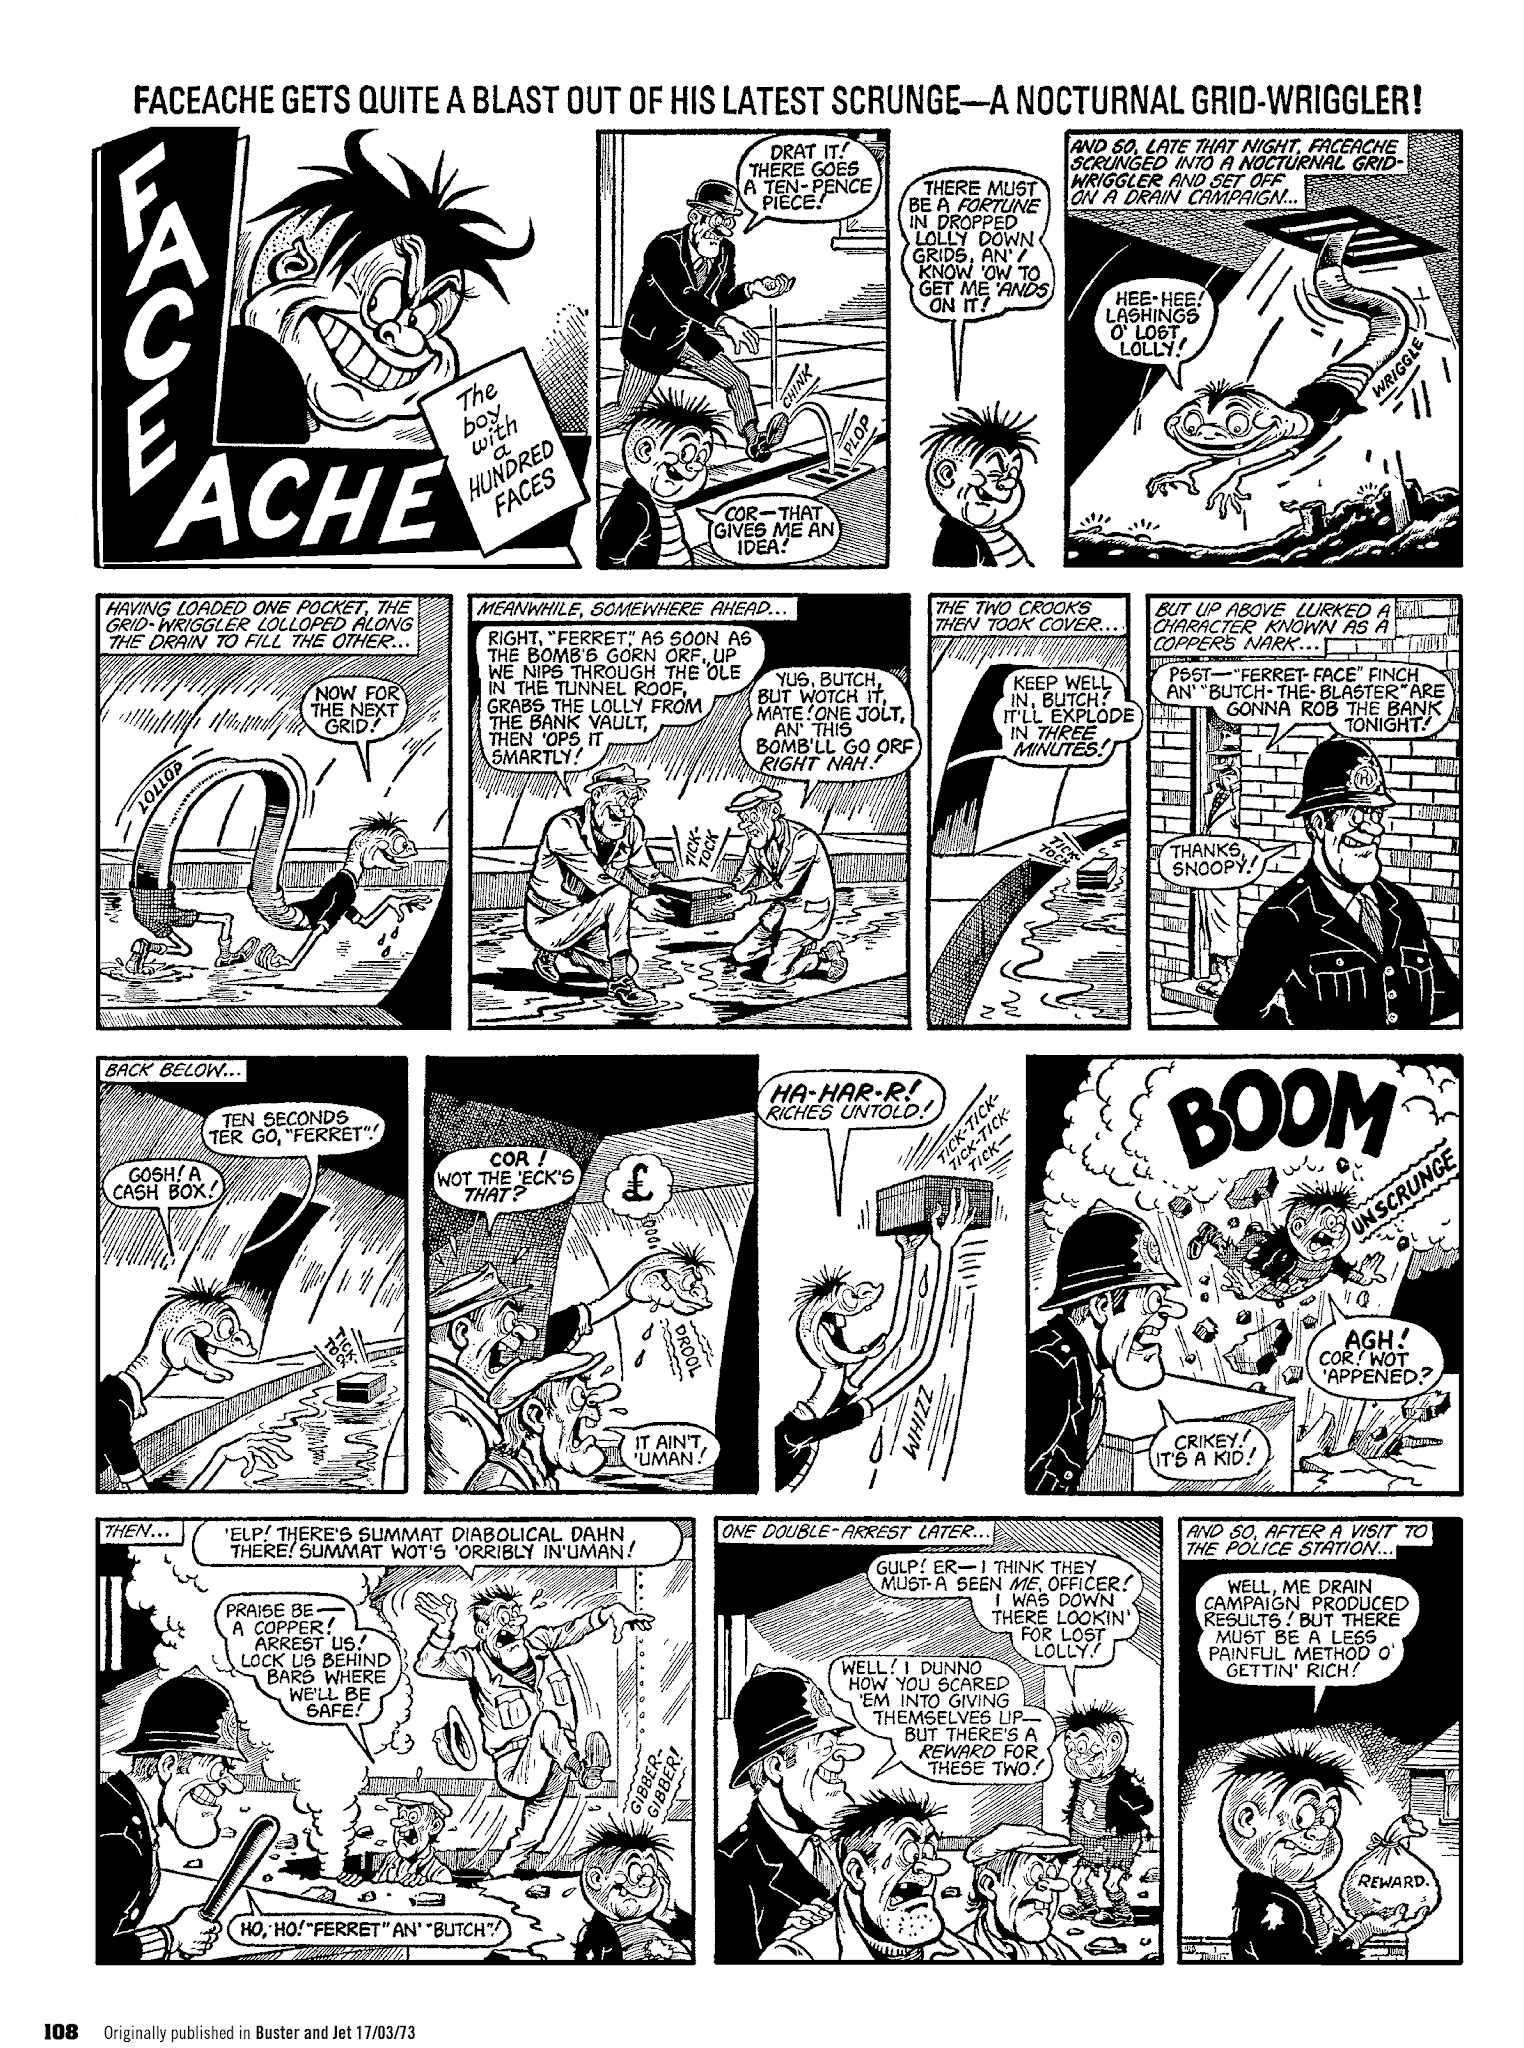 Read online Faceache: The First Hundred Scrunges comic -  Issue # TPB 1 - 110